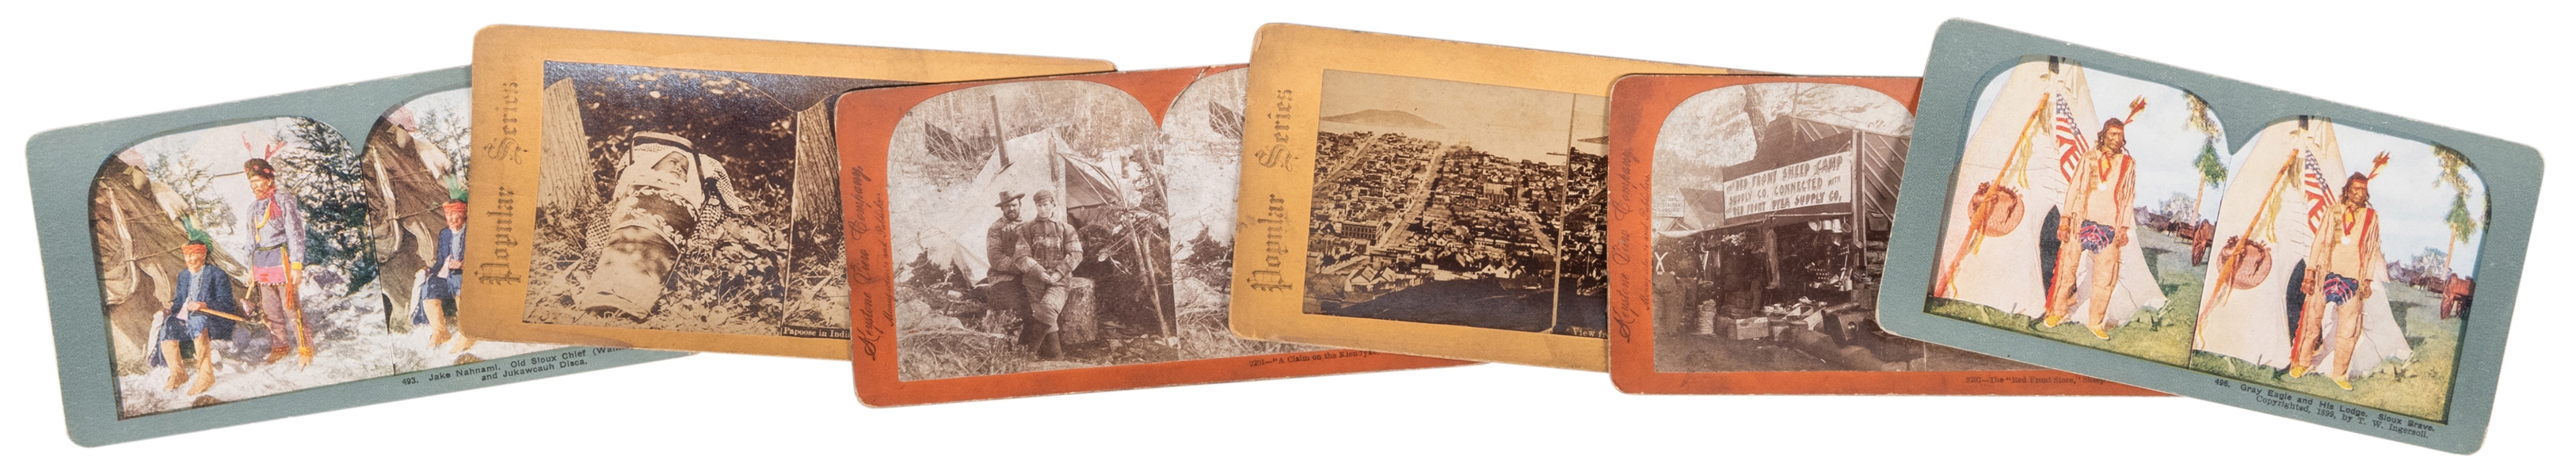  [MINING] Six Stereoscope Cards Depicting Native Americans a...